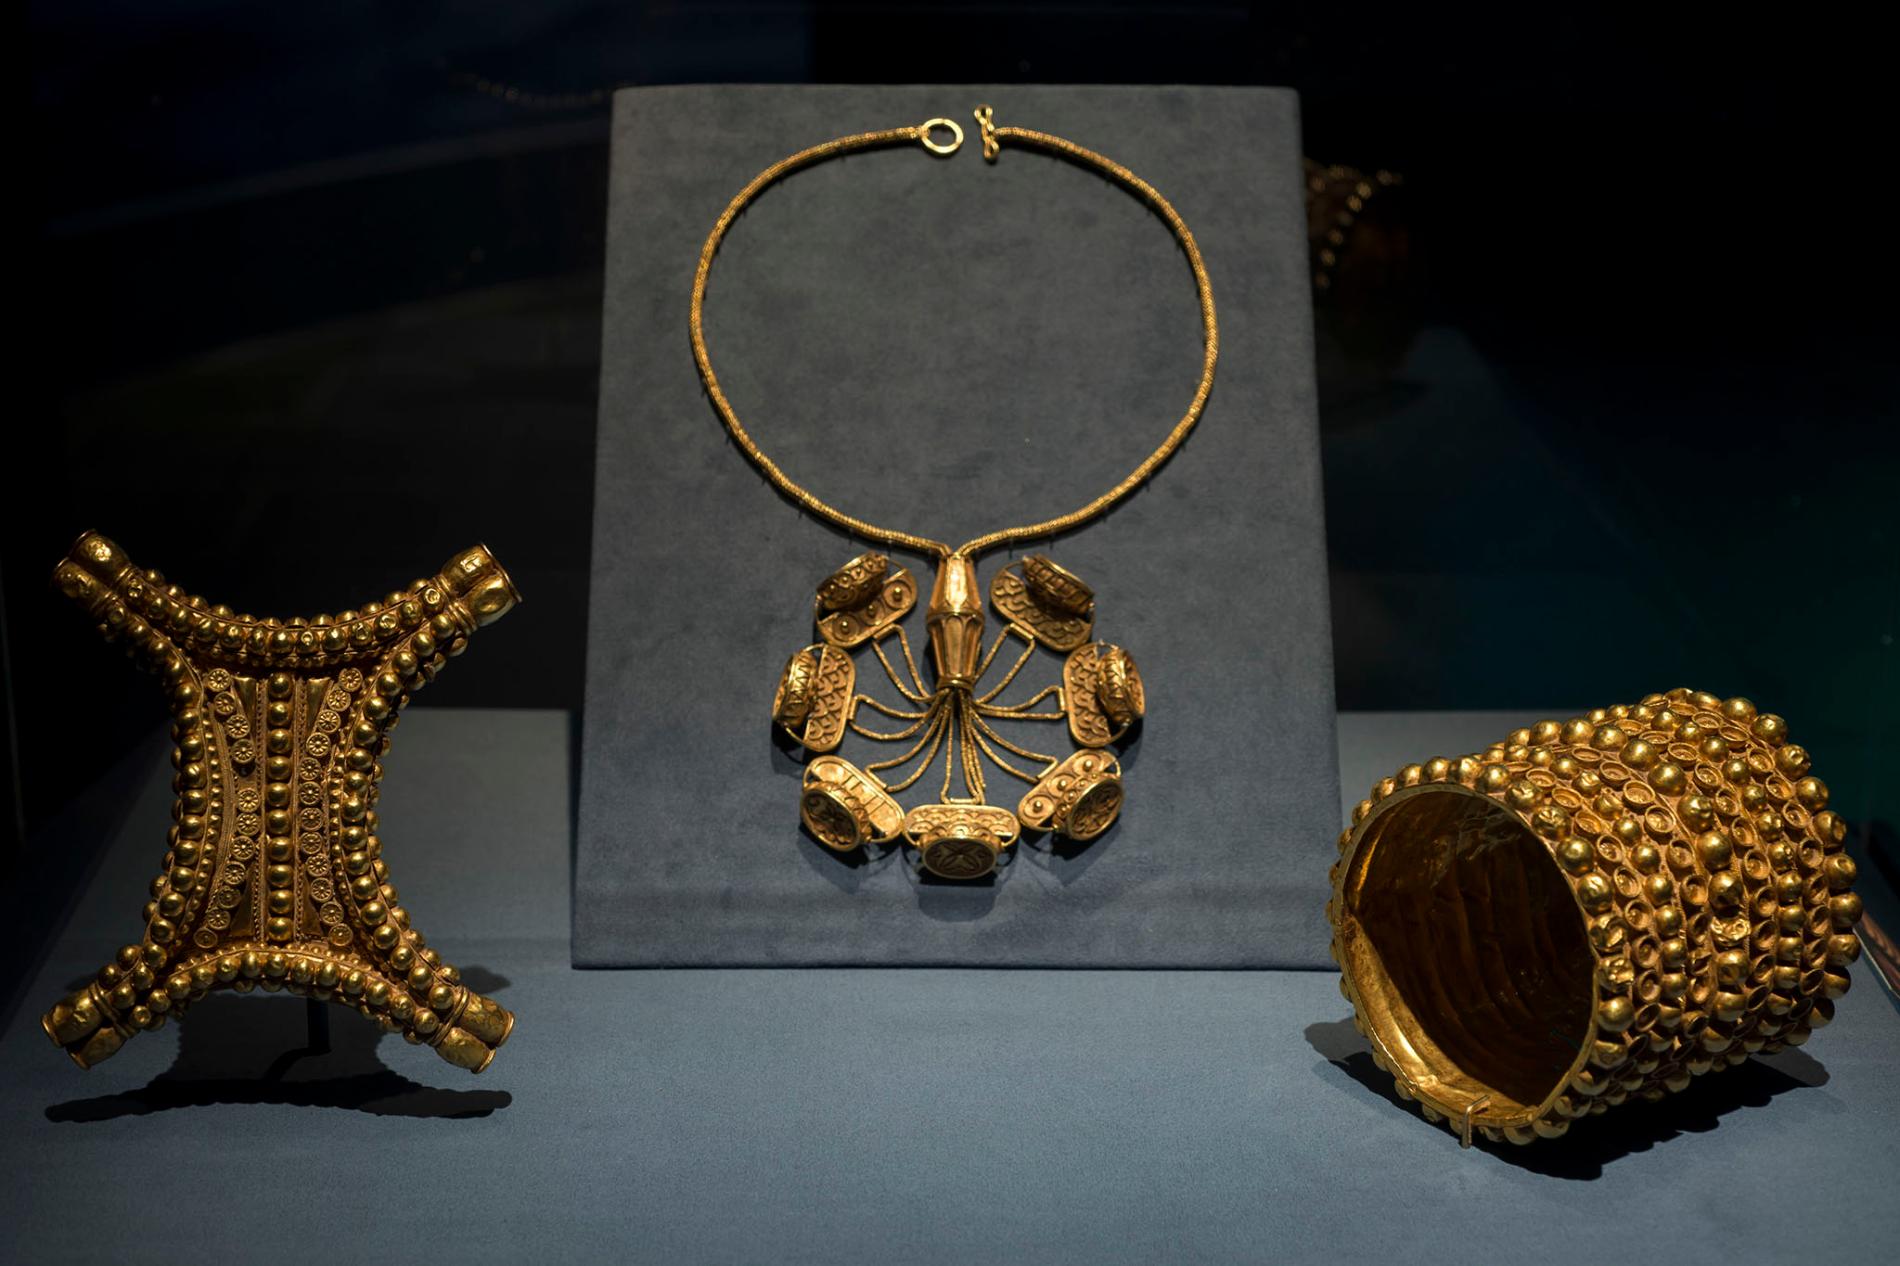 The Carambolo Treasure consists of 21 pieces of gold jewelry discovered by construction workers near Seville, Spain in 1958.